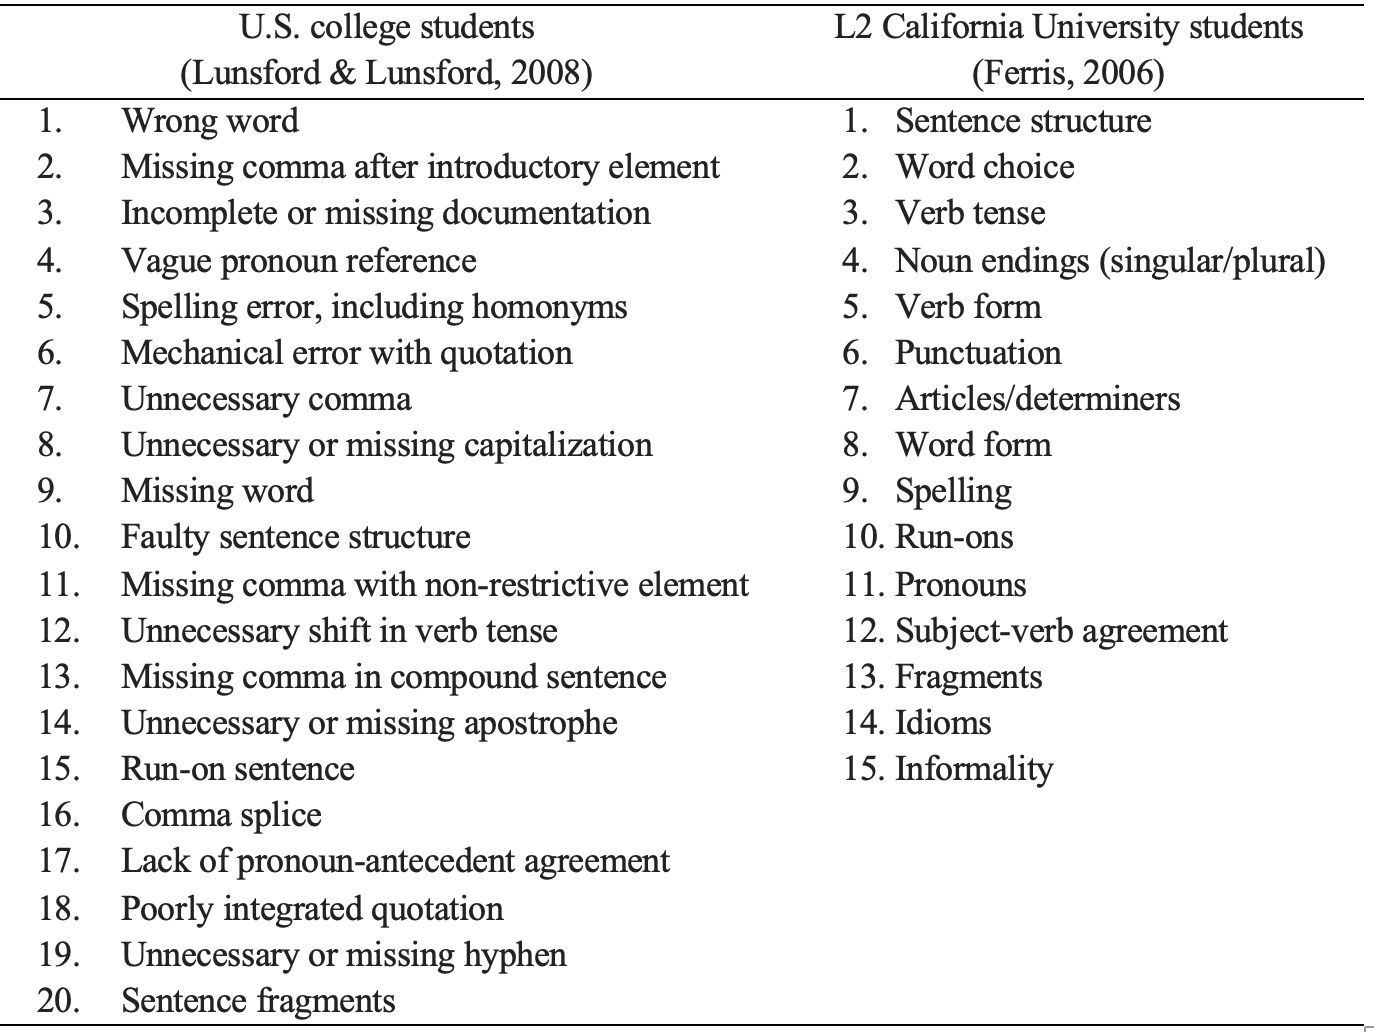 Table 2 is a comparison of the Top 20 writing errors of U.S. college students as shown in Lunsford and Lunsford’s 2008 research and the most common sentence-level errors for ELL writers at University of California schools as shown in 2006 research by Ferris.